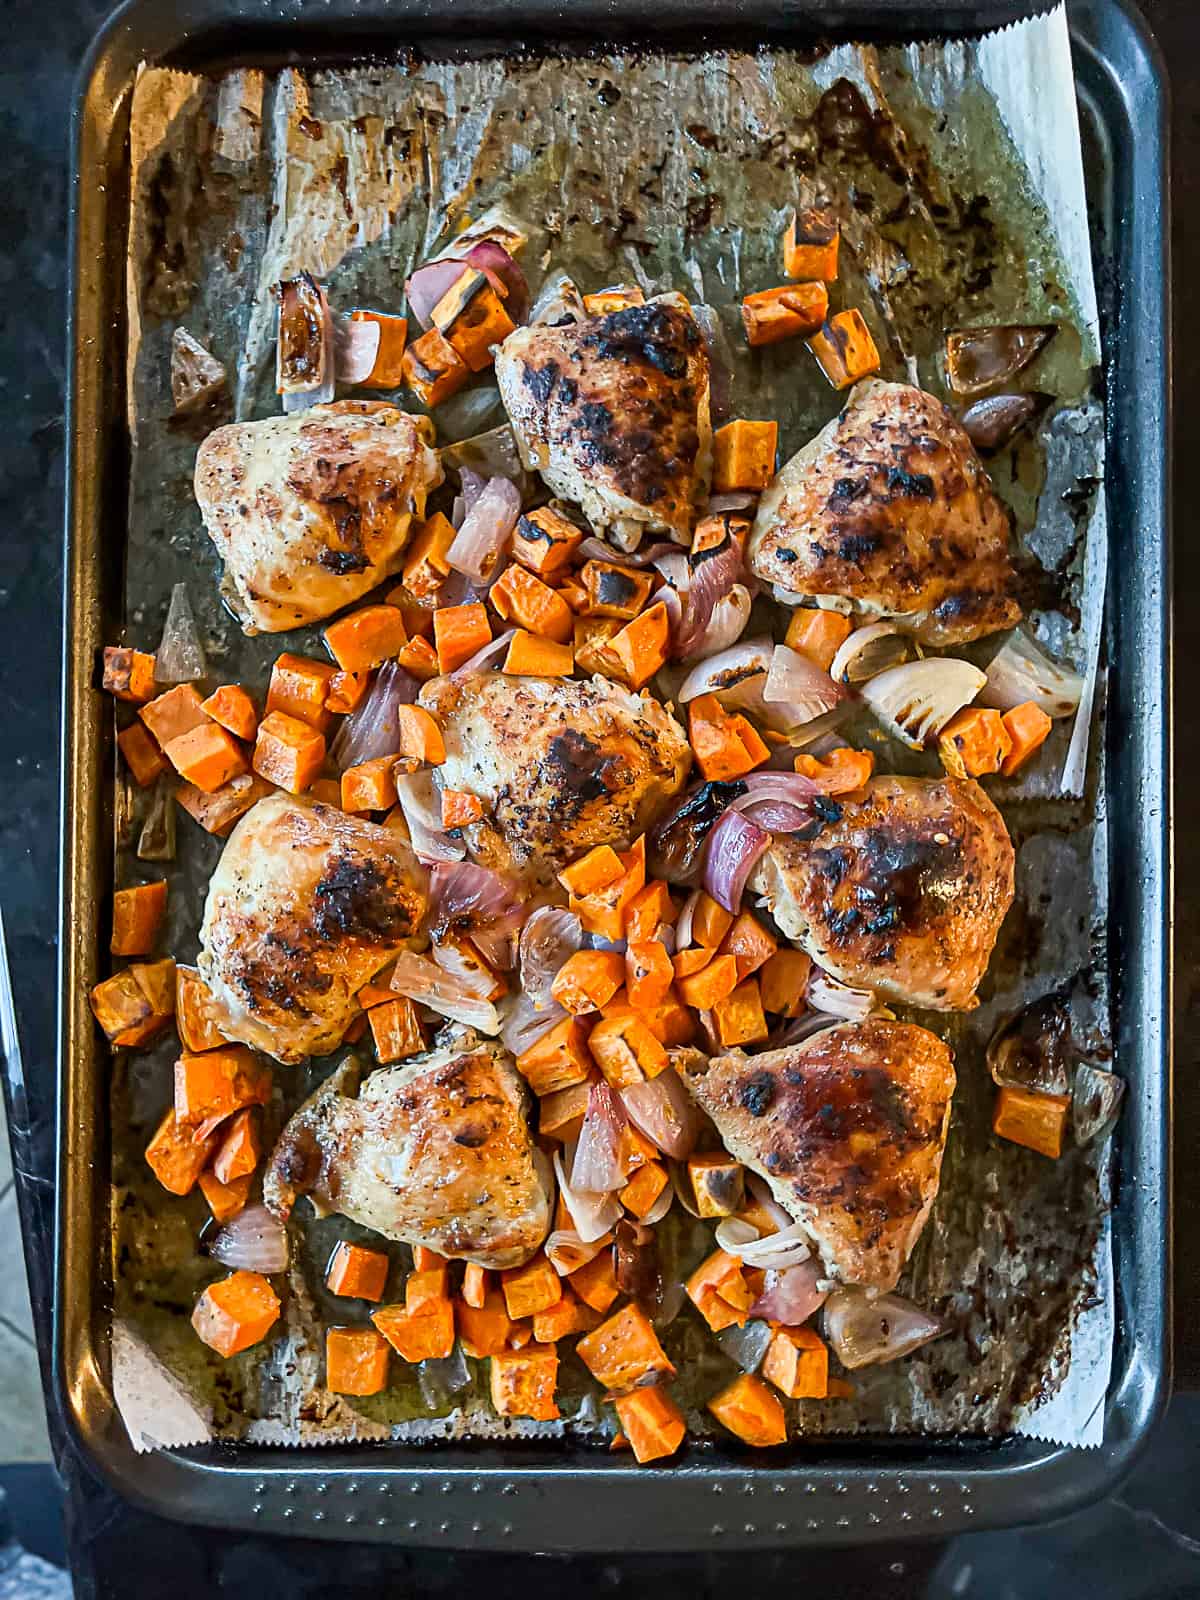 Parchment paper lined sheet pan meal with chicken thighs and potatoes